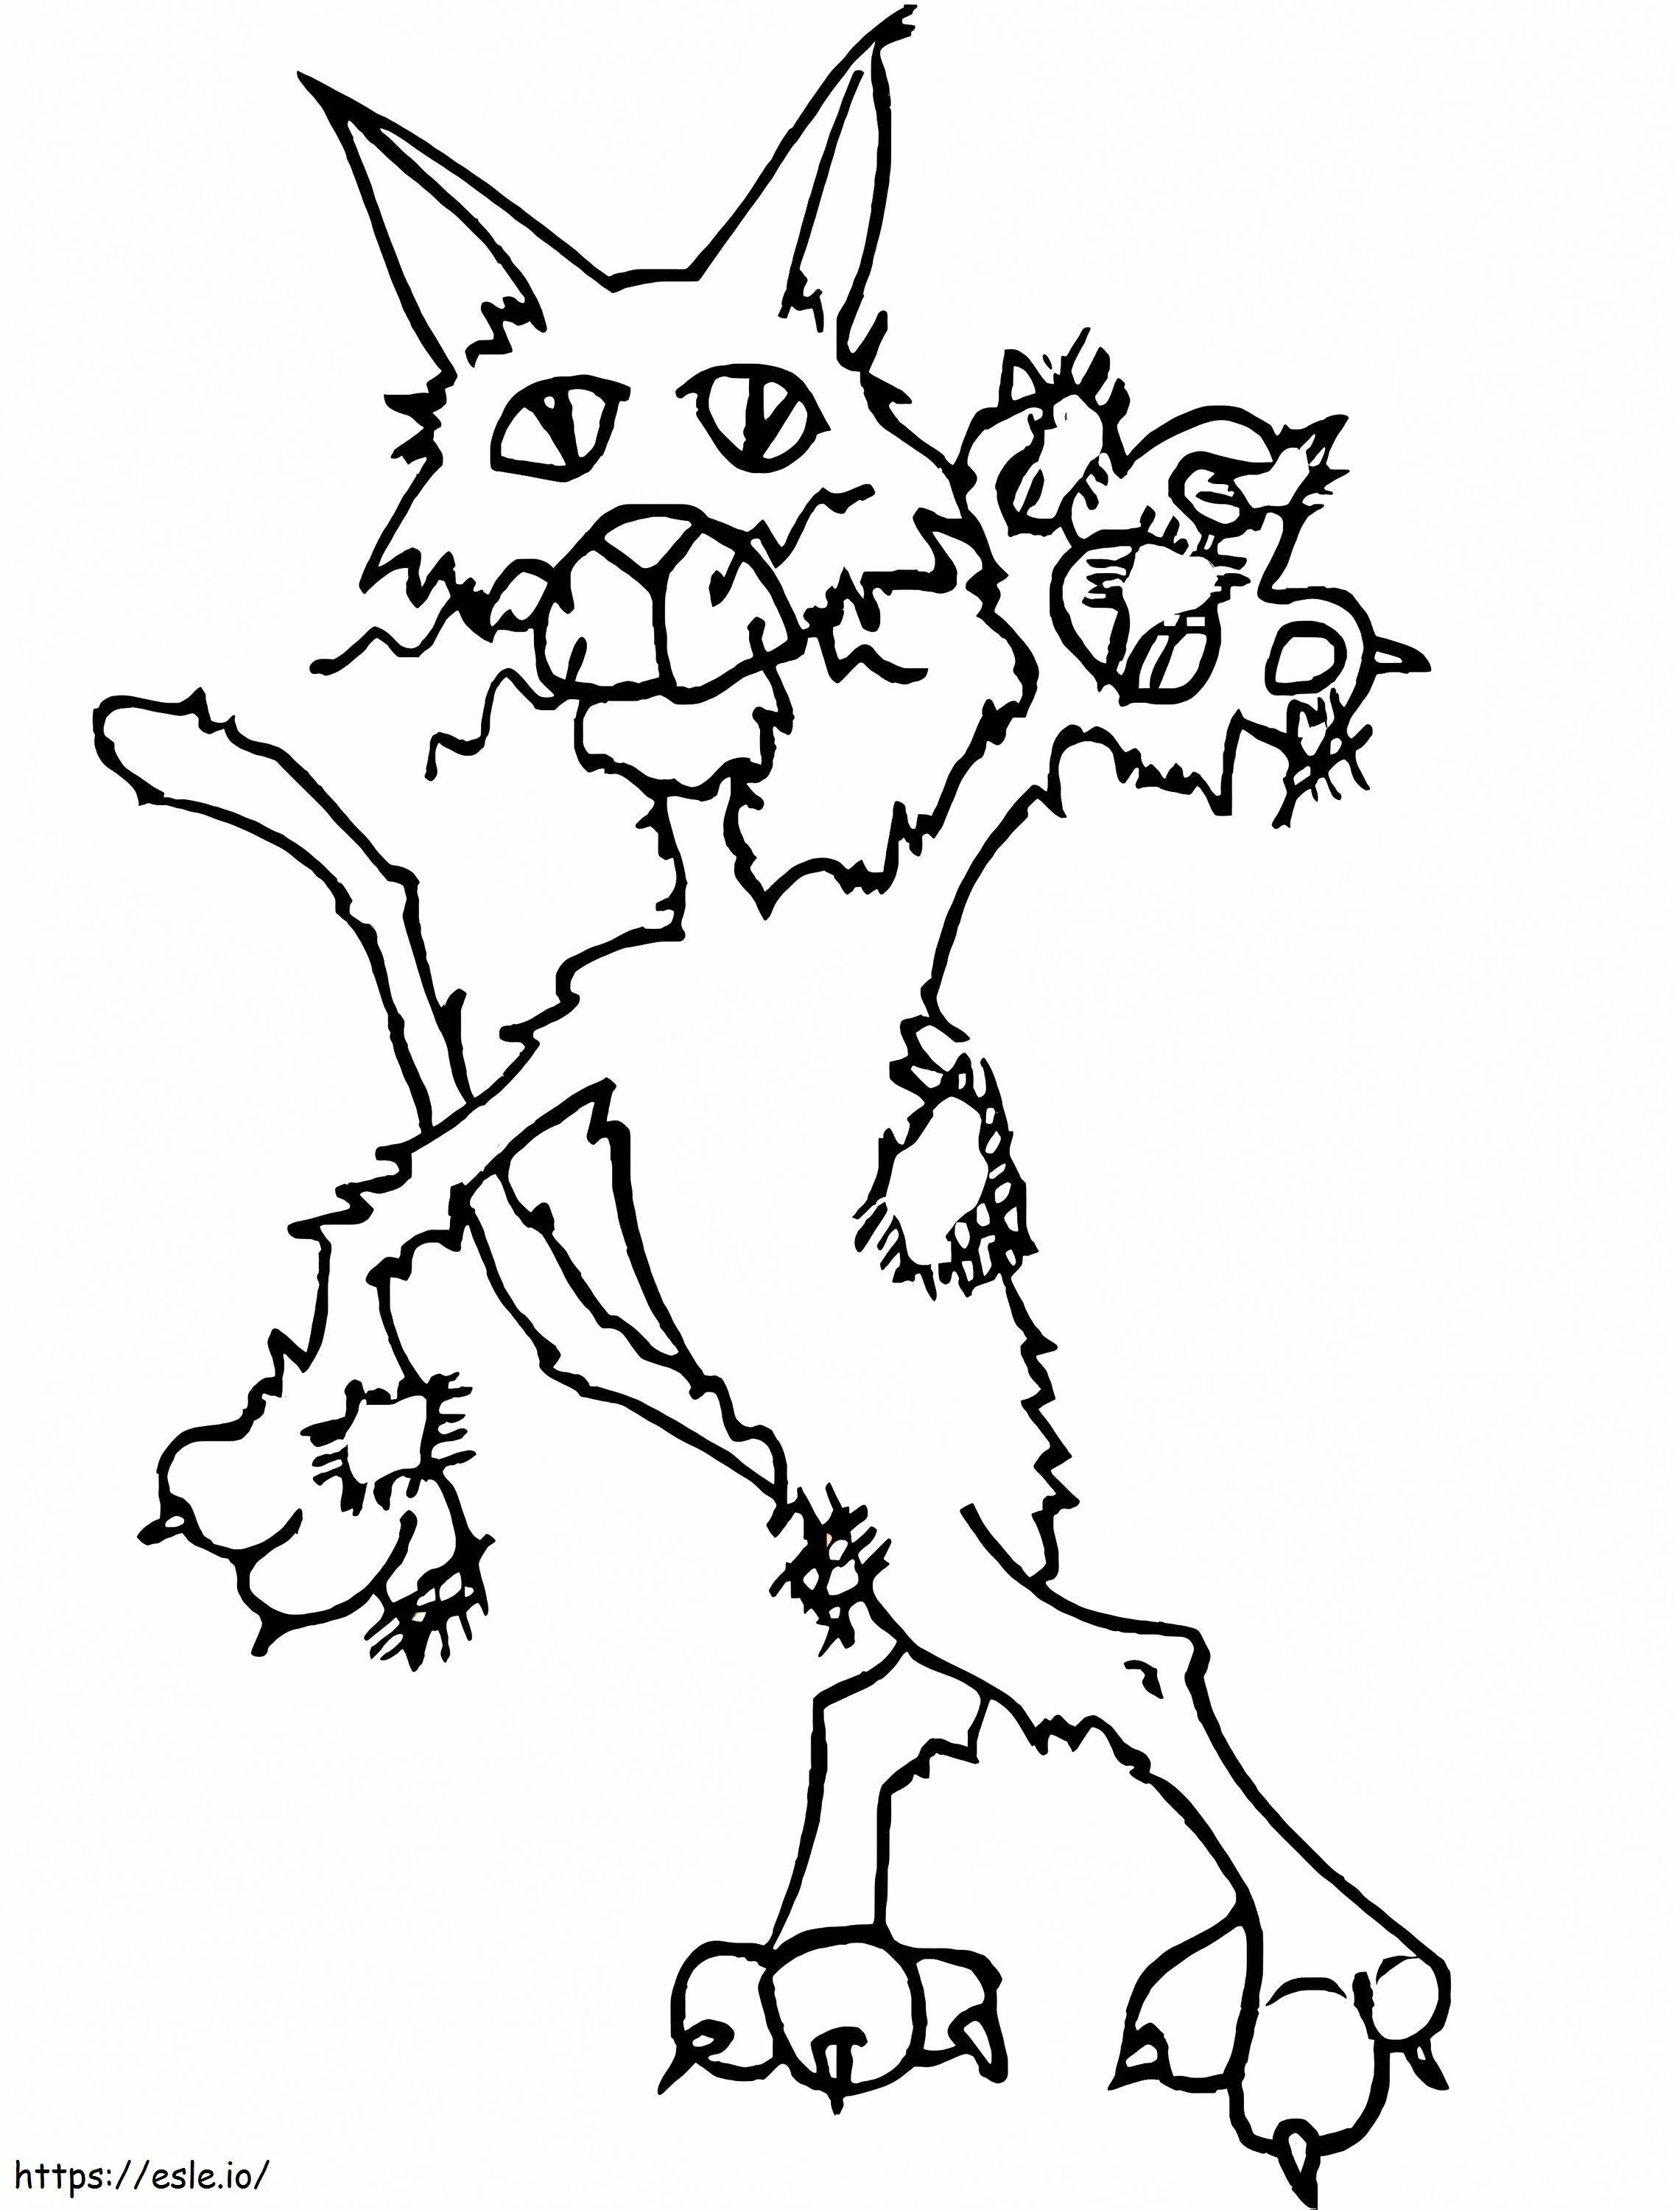 Ugly Cat coloring page